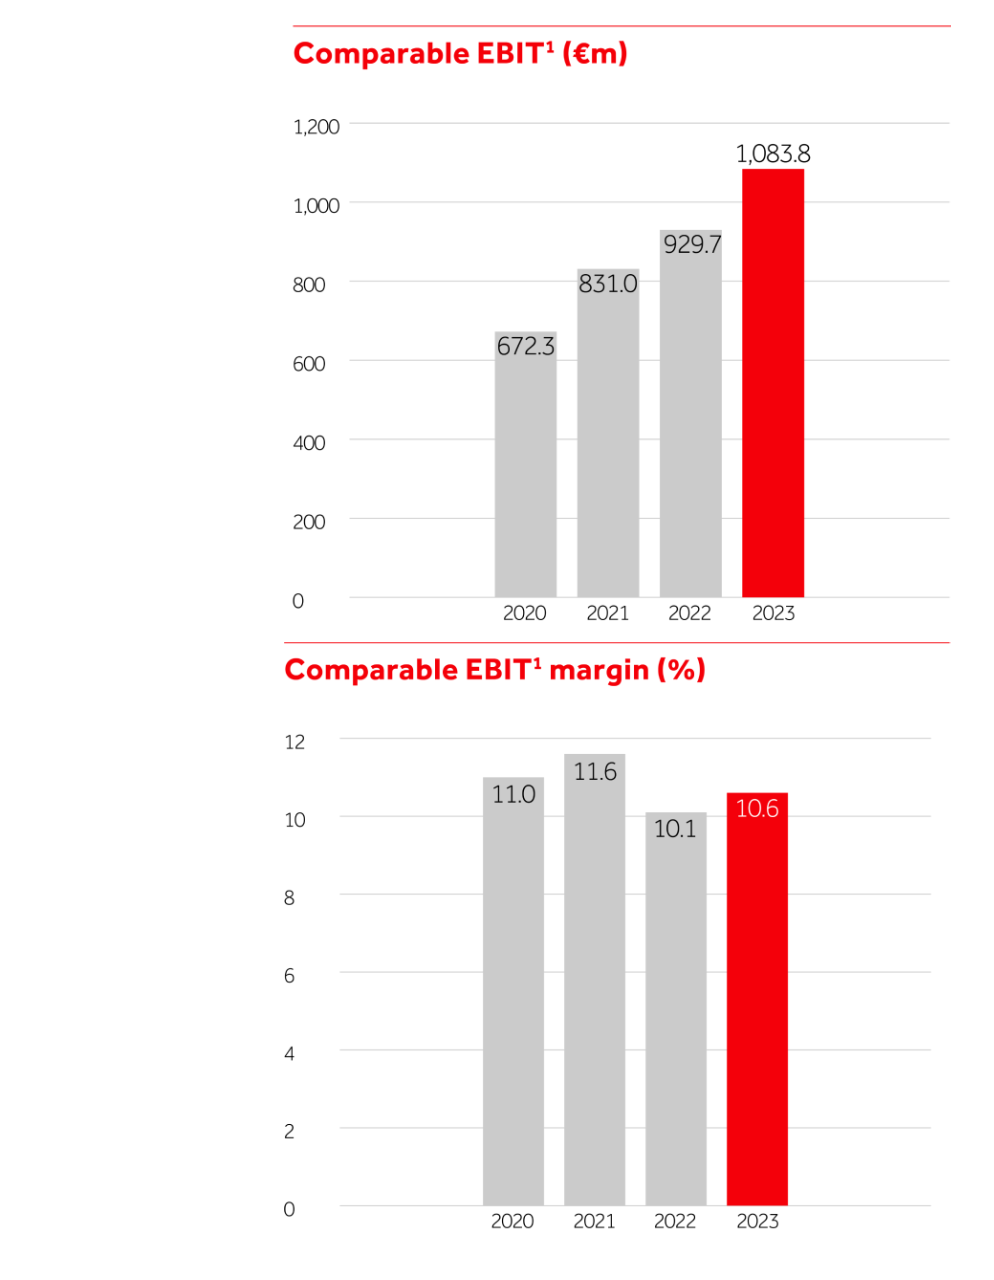 Comparable EBIT and Comparable EBIT margin